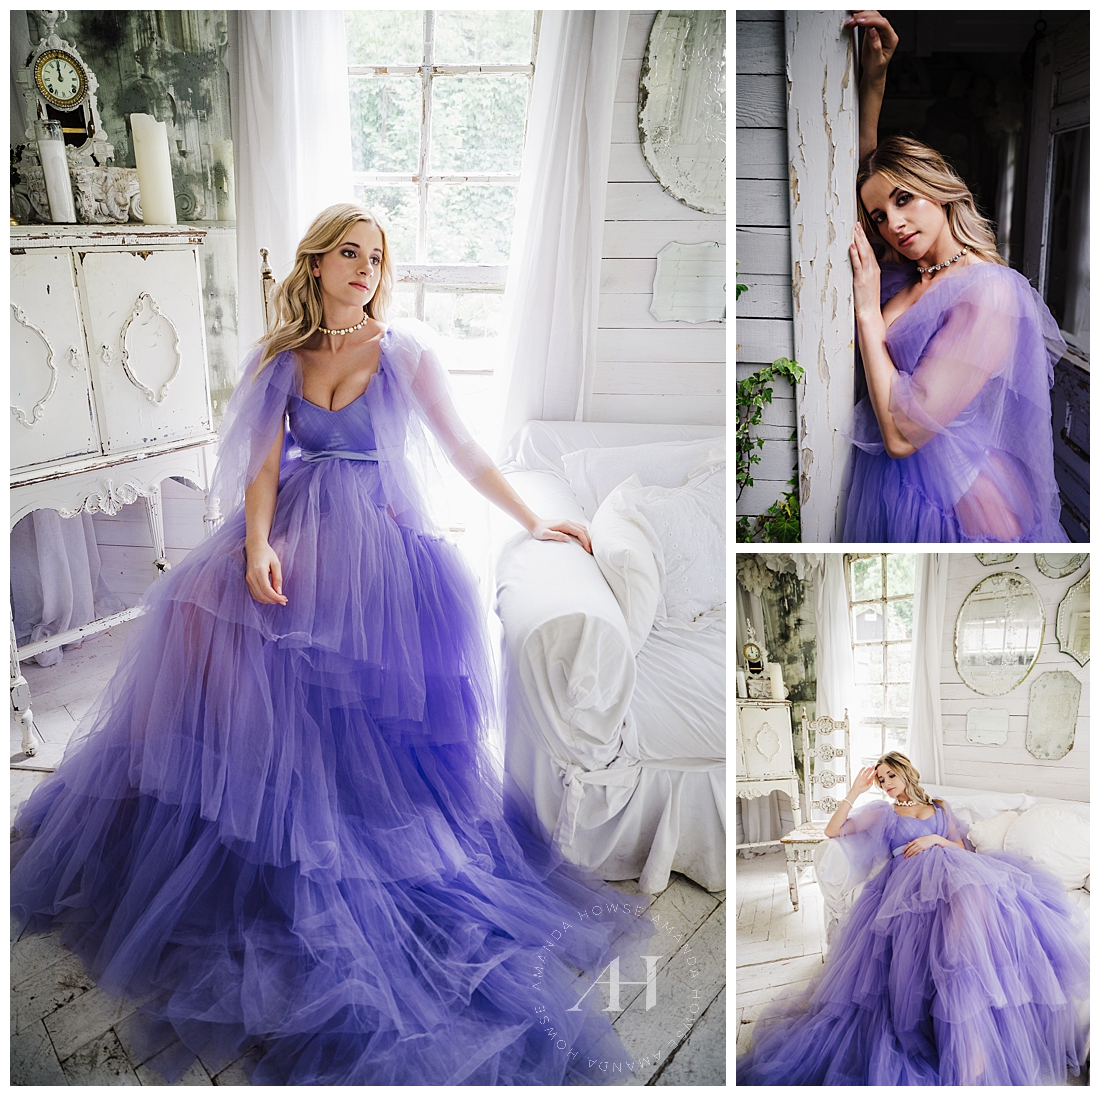 Model in a Tulle Ballgown in a Little White House | How to Style an Editorial Shoot, Creative Shoot Ideas for High School Senior Photographers | Photographed by the Best Tacoma Senior Photographer Amanda Howse